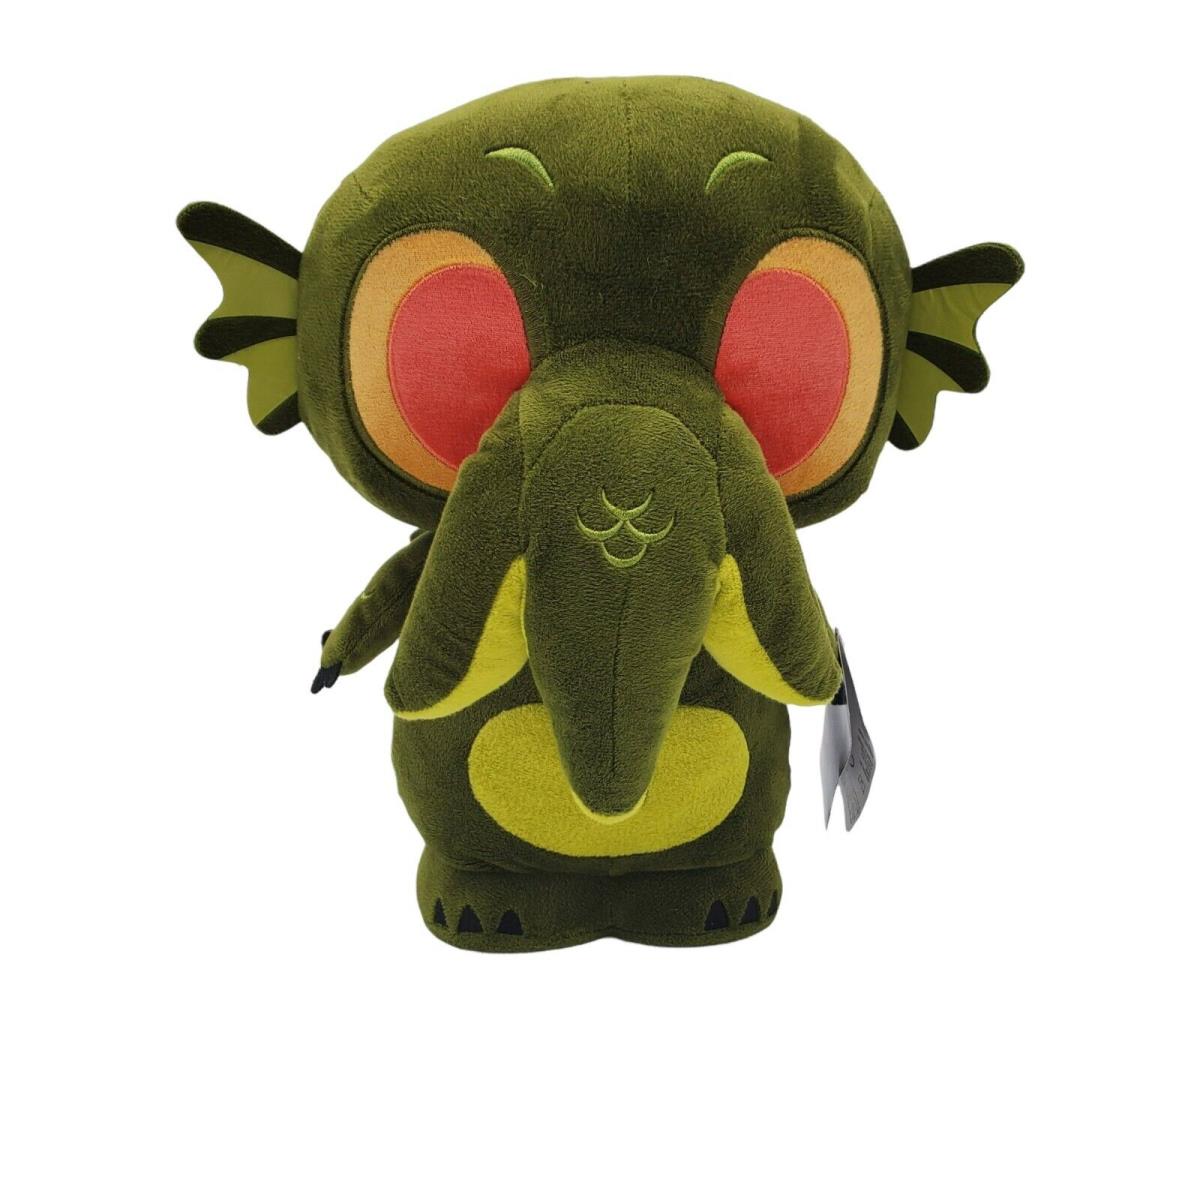 The Real Cthulhu Funko Collectible 12 Plush Green Vaulted 2017 Standing